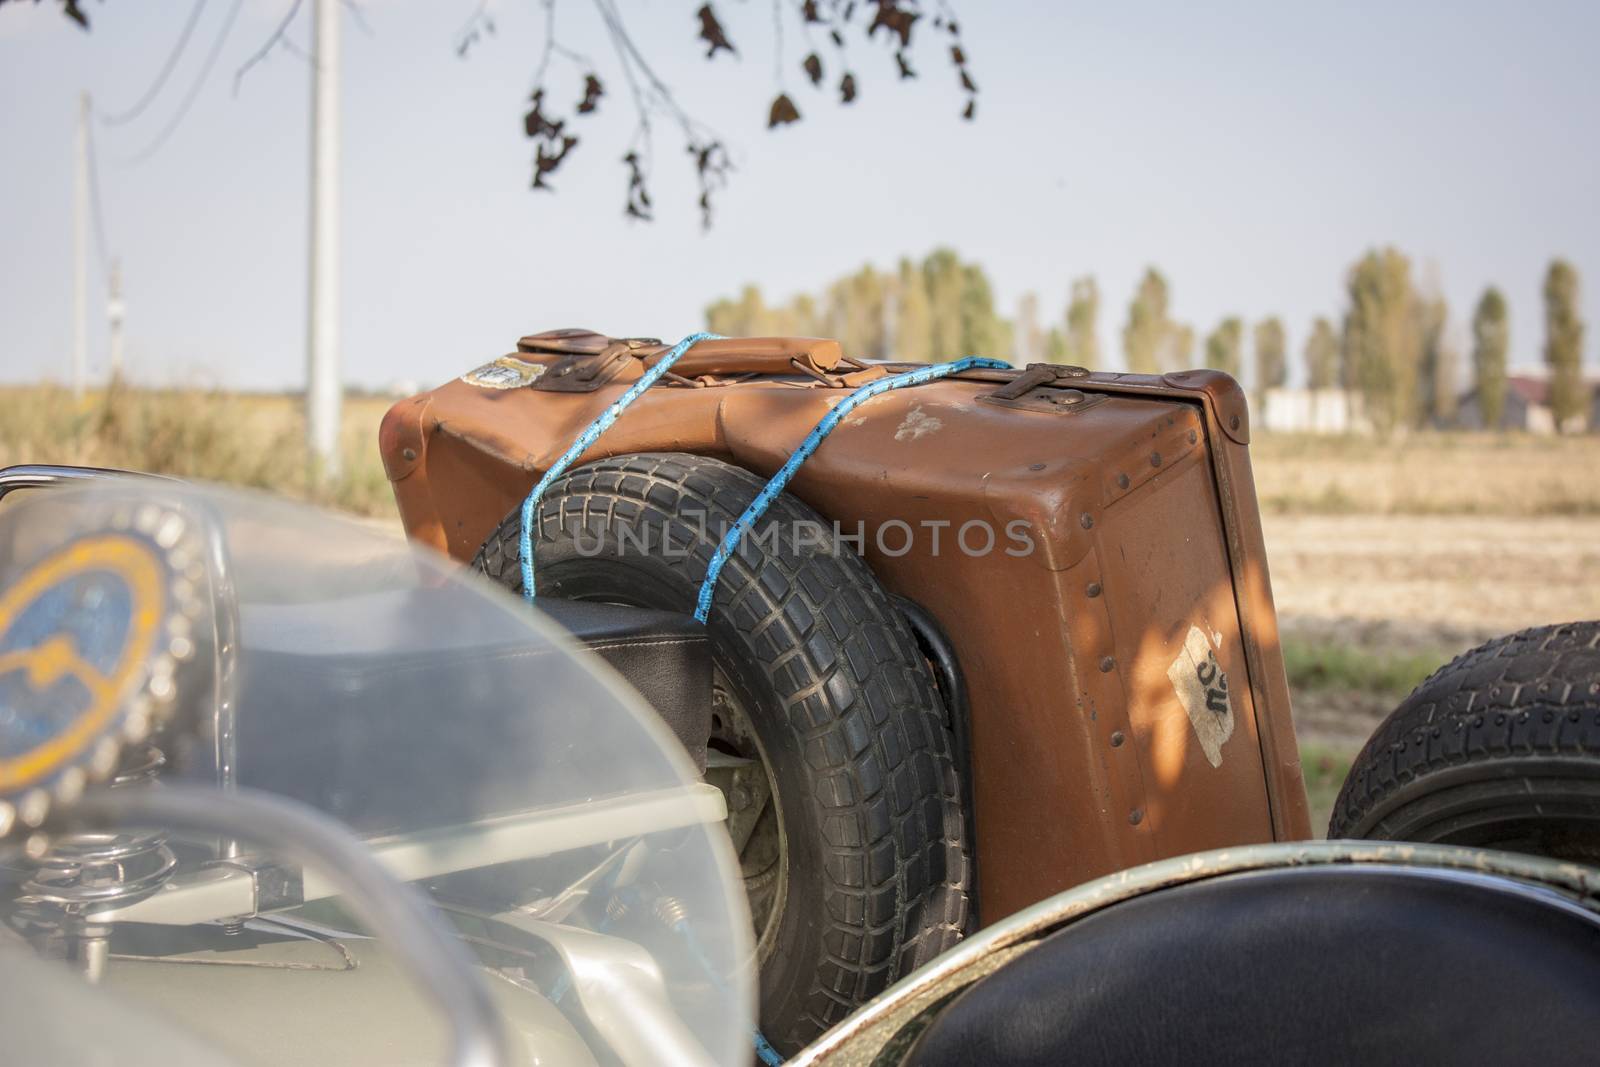 Old vintage leather suitcase, attached to an old vintage vehicle Italian ready to go and venture into a new journey. Abientazione: Italian countryside.